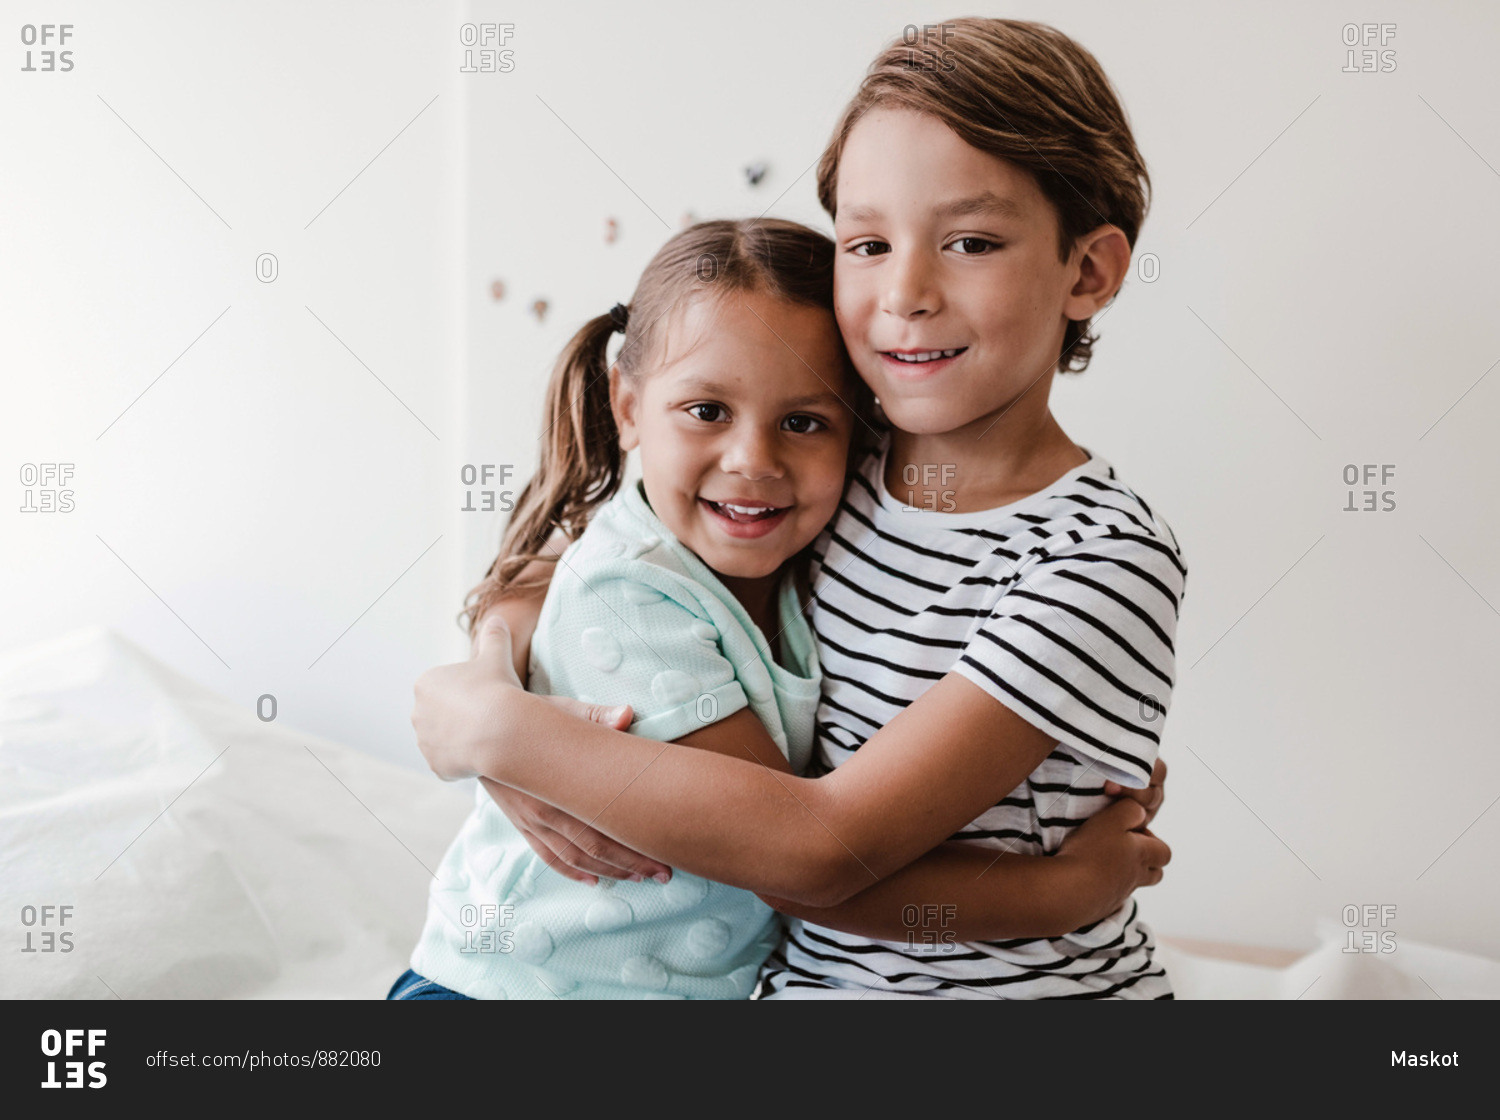 Portrait of smiling brother and sister embracing while sitting in medical examination room